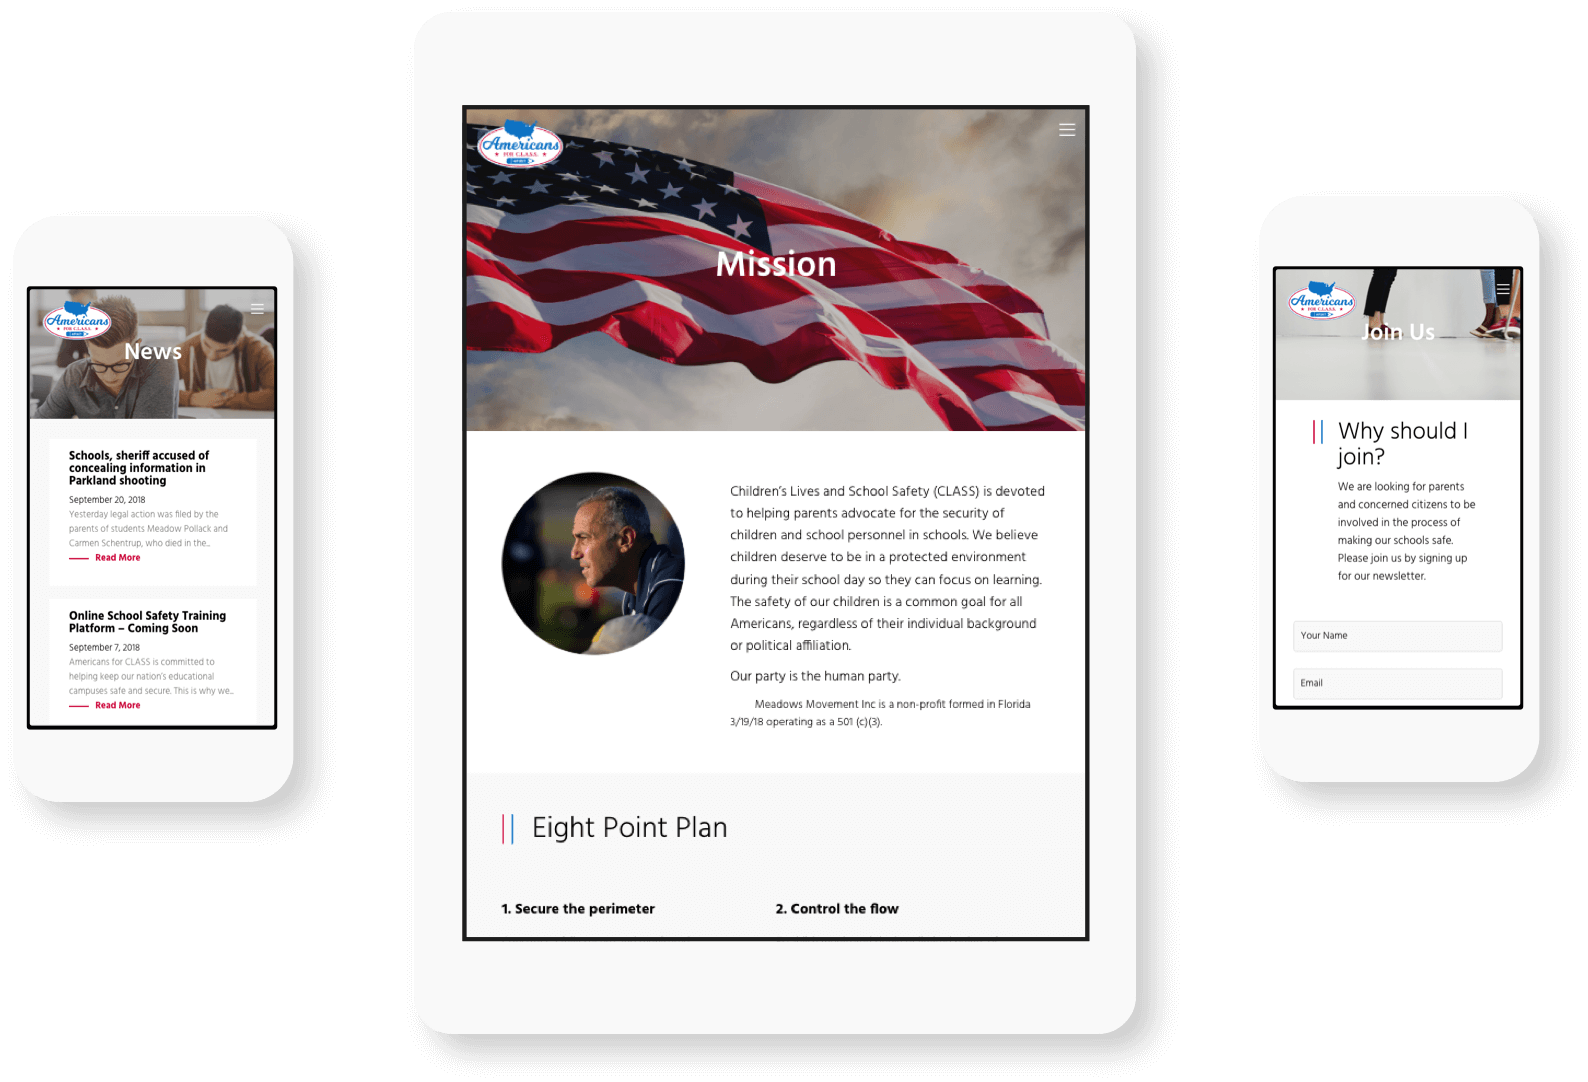 Americans for Class website seen on Mobile devices